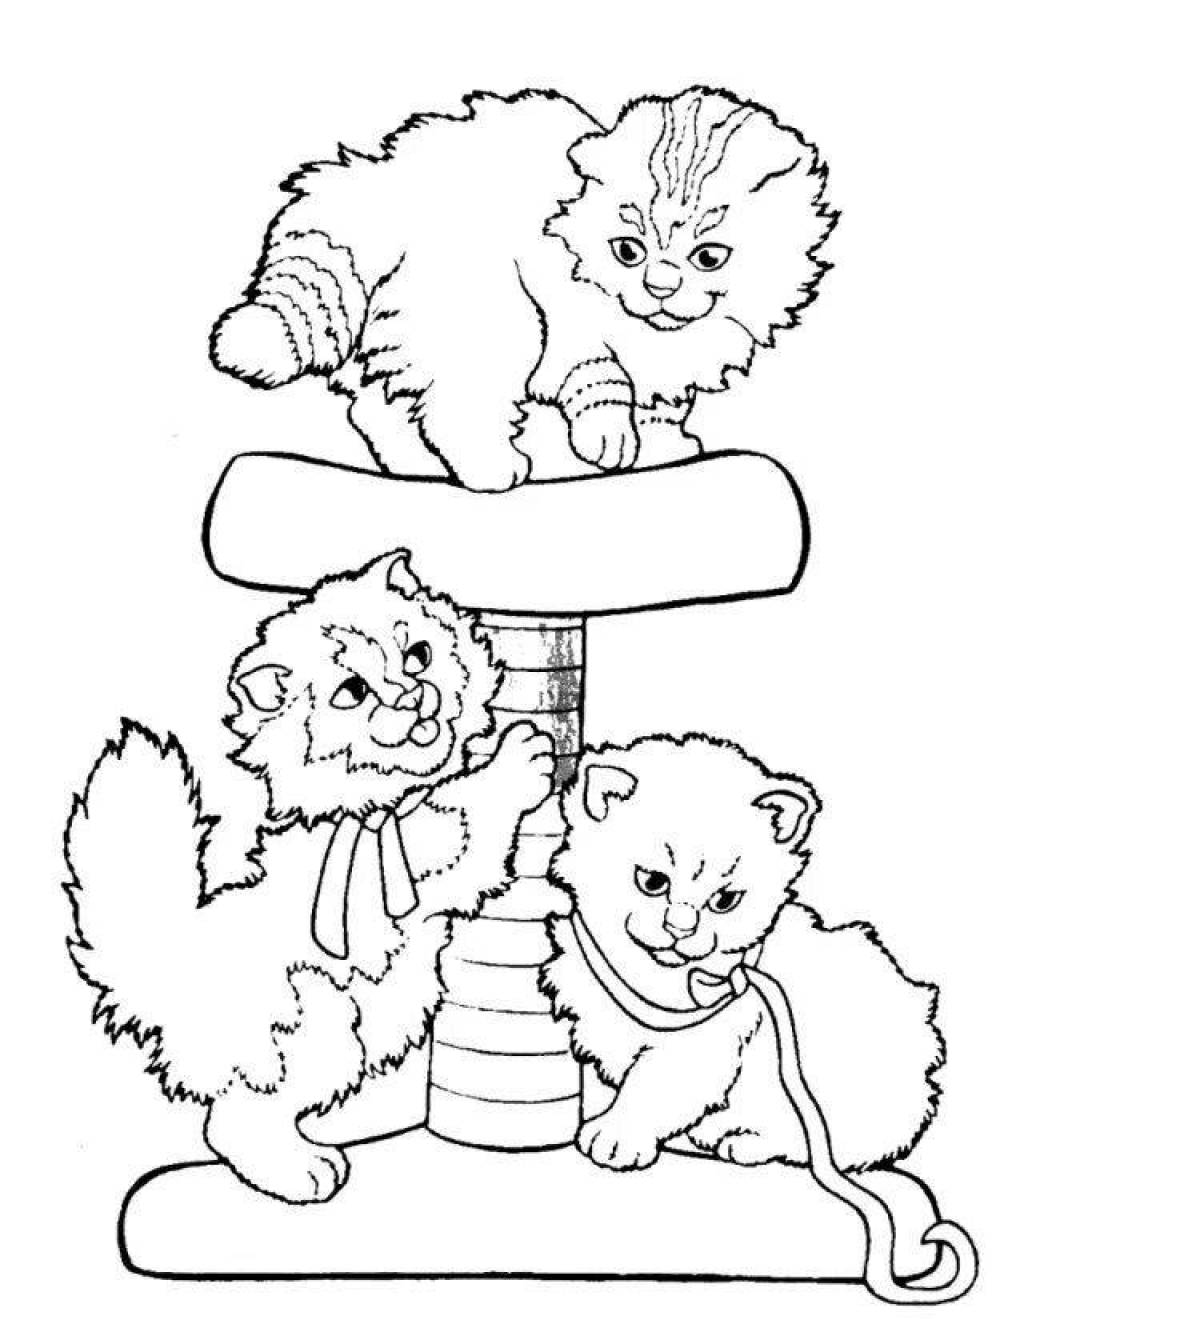 Coloring happy furry friends